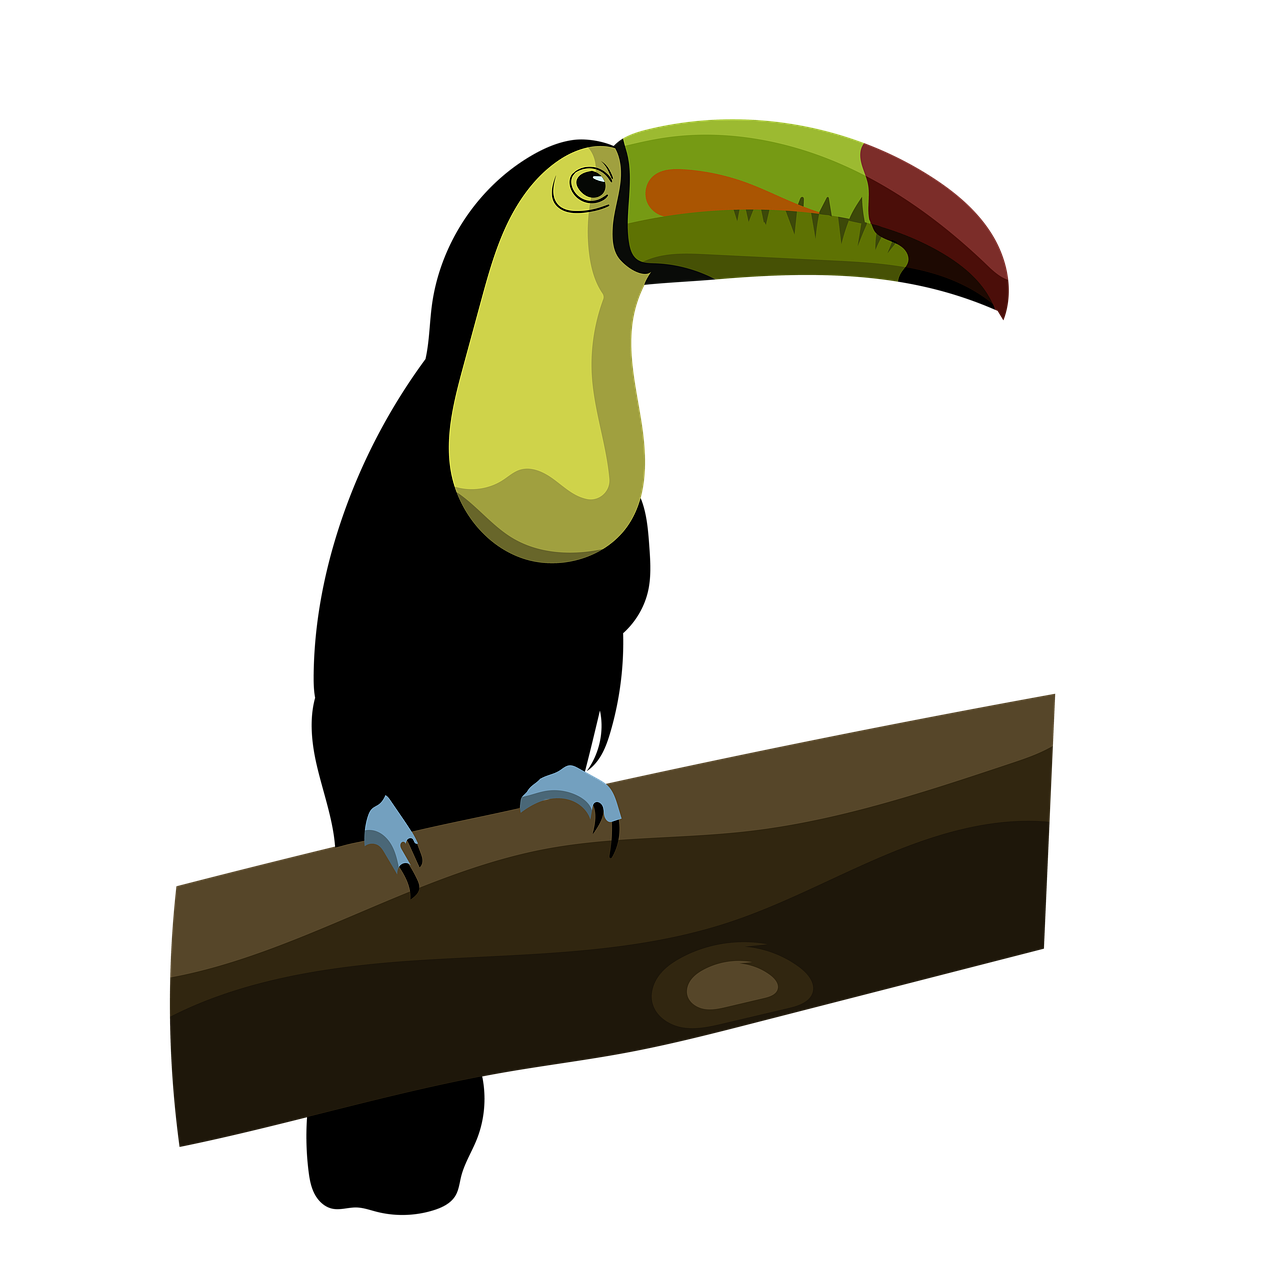 a toucan sitting on top of a tree branch, an illustration of, inspired by Melchior d'Hondecoeter, conceptual art, wikihow illustration, on a flat color black background, with a wooden stuff, worm